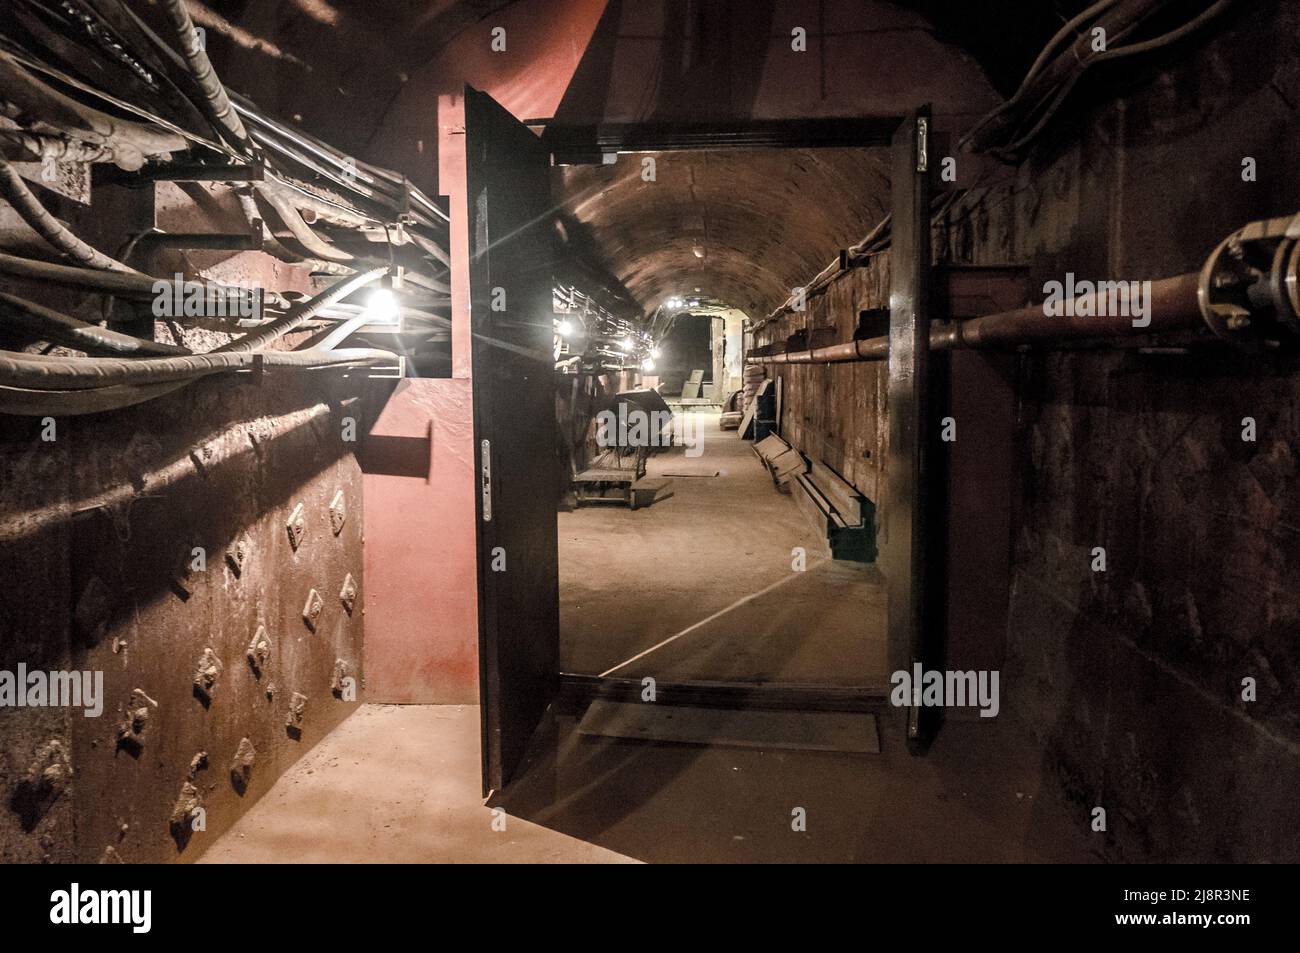 Moscow, Russia - October 25, 2017: Tunnel at Bunker-42, anti-nuclear underground facility built in 1956 as command post of strategic nuclear forces of Stock Photo